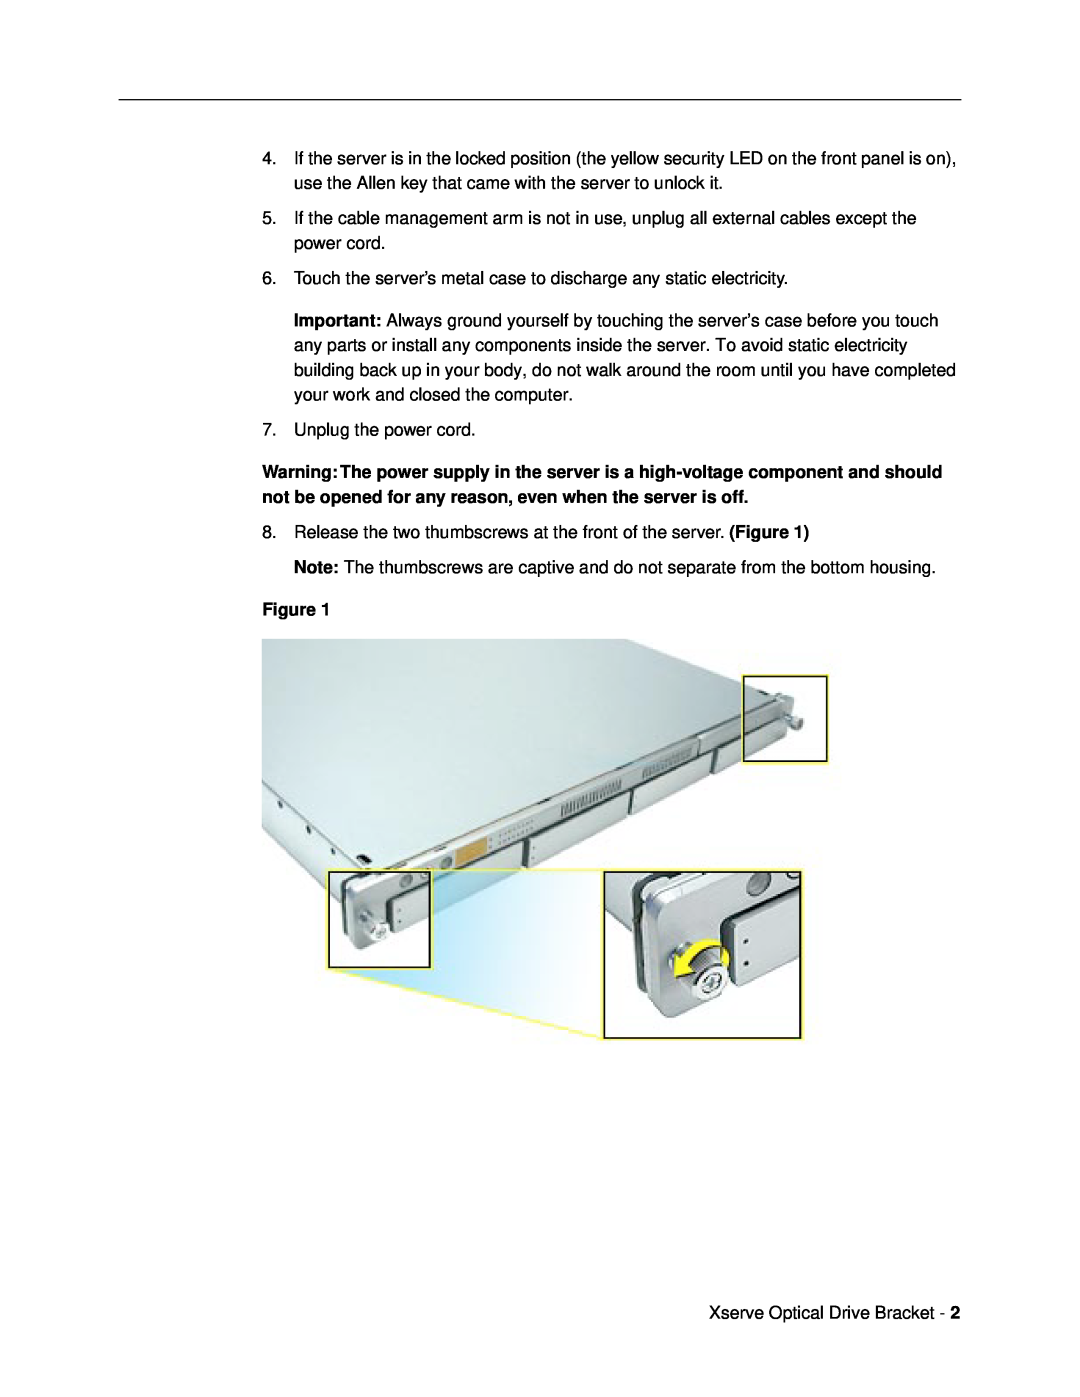 Apple Optical Drive Bracket warranty Touch the server’s metal case to discharge any static electricity 